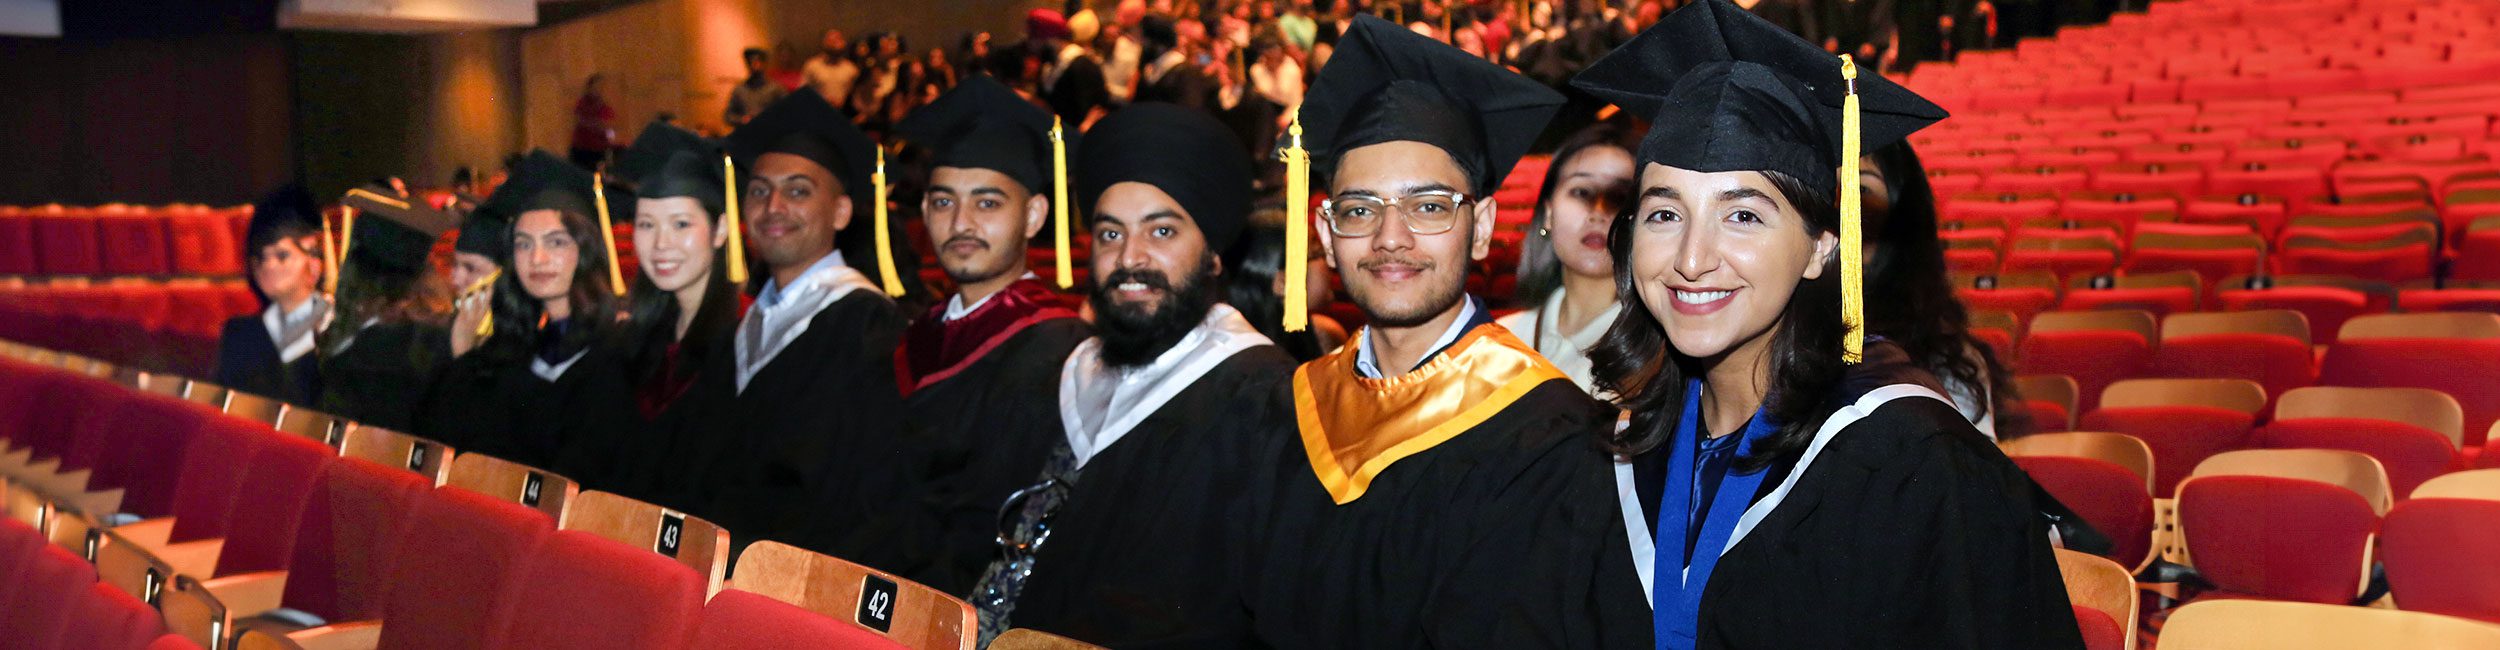 A row of students getting ready for the Convocation Ceremony